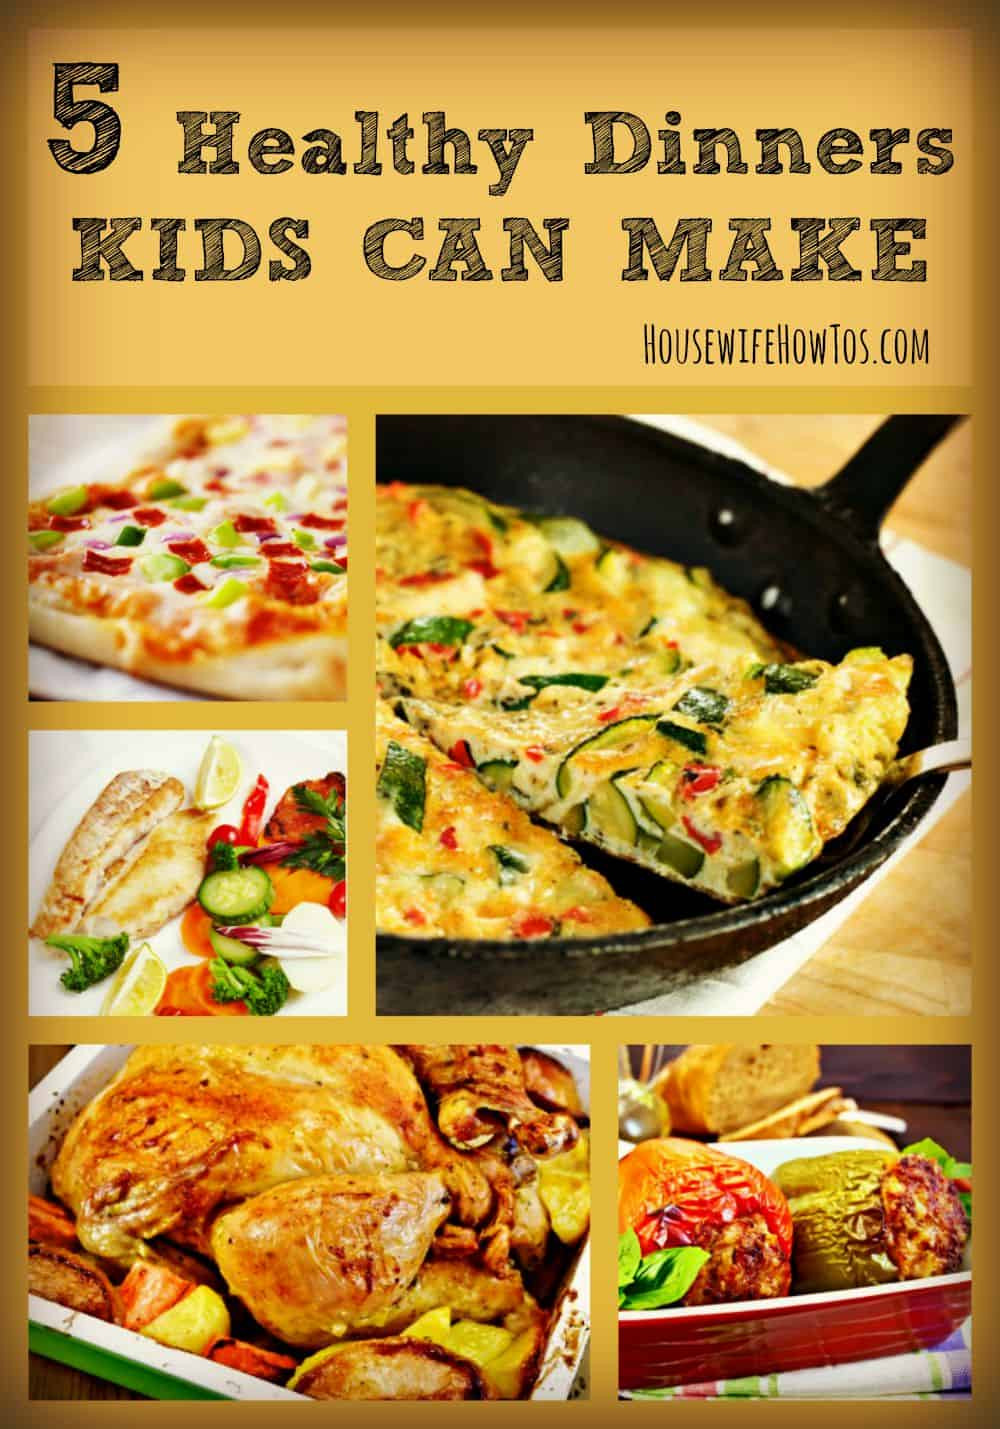 Healthy Recipes Kids Can Make
 5 Healthy Dinners Kids Can Make